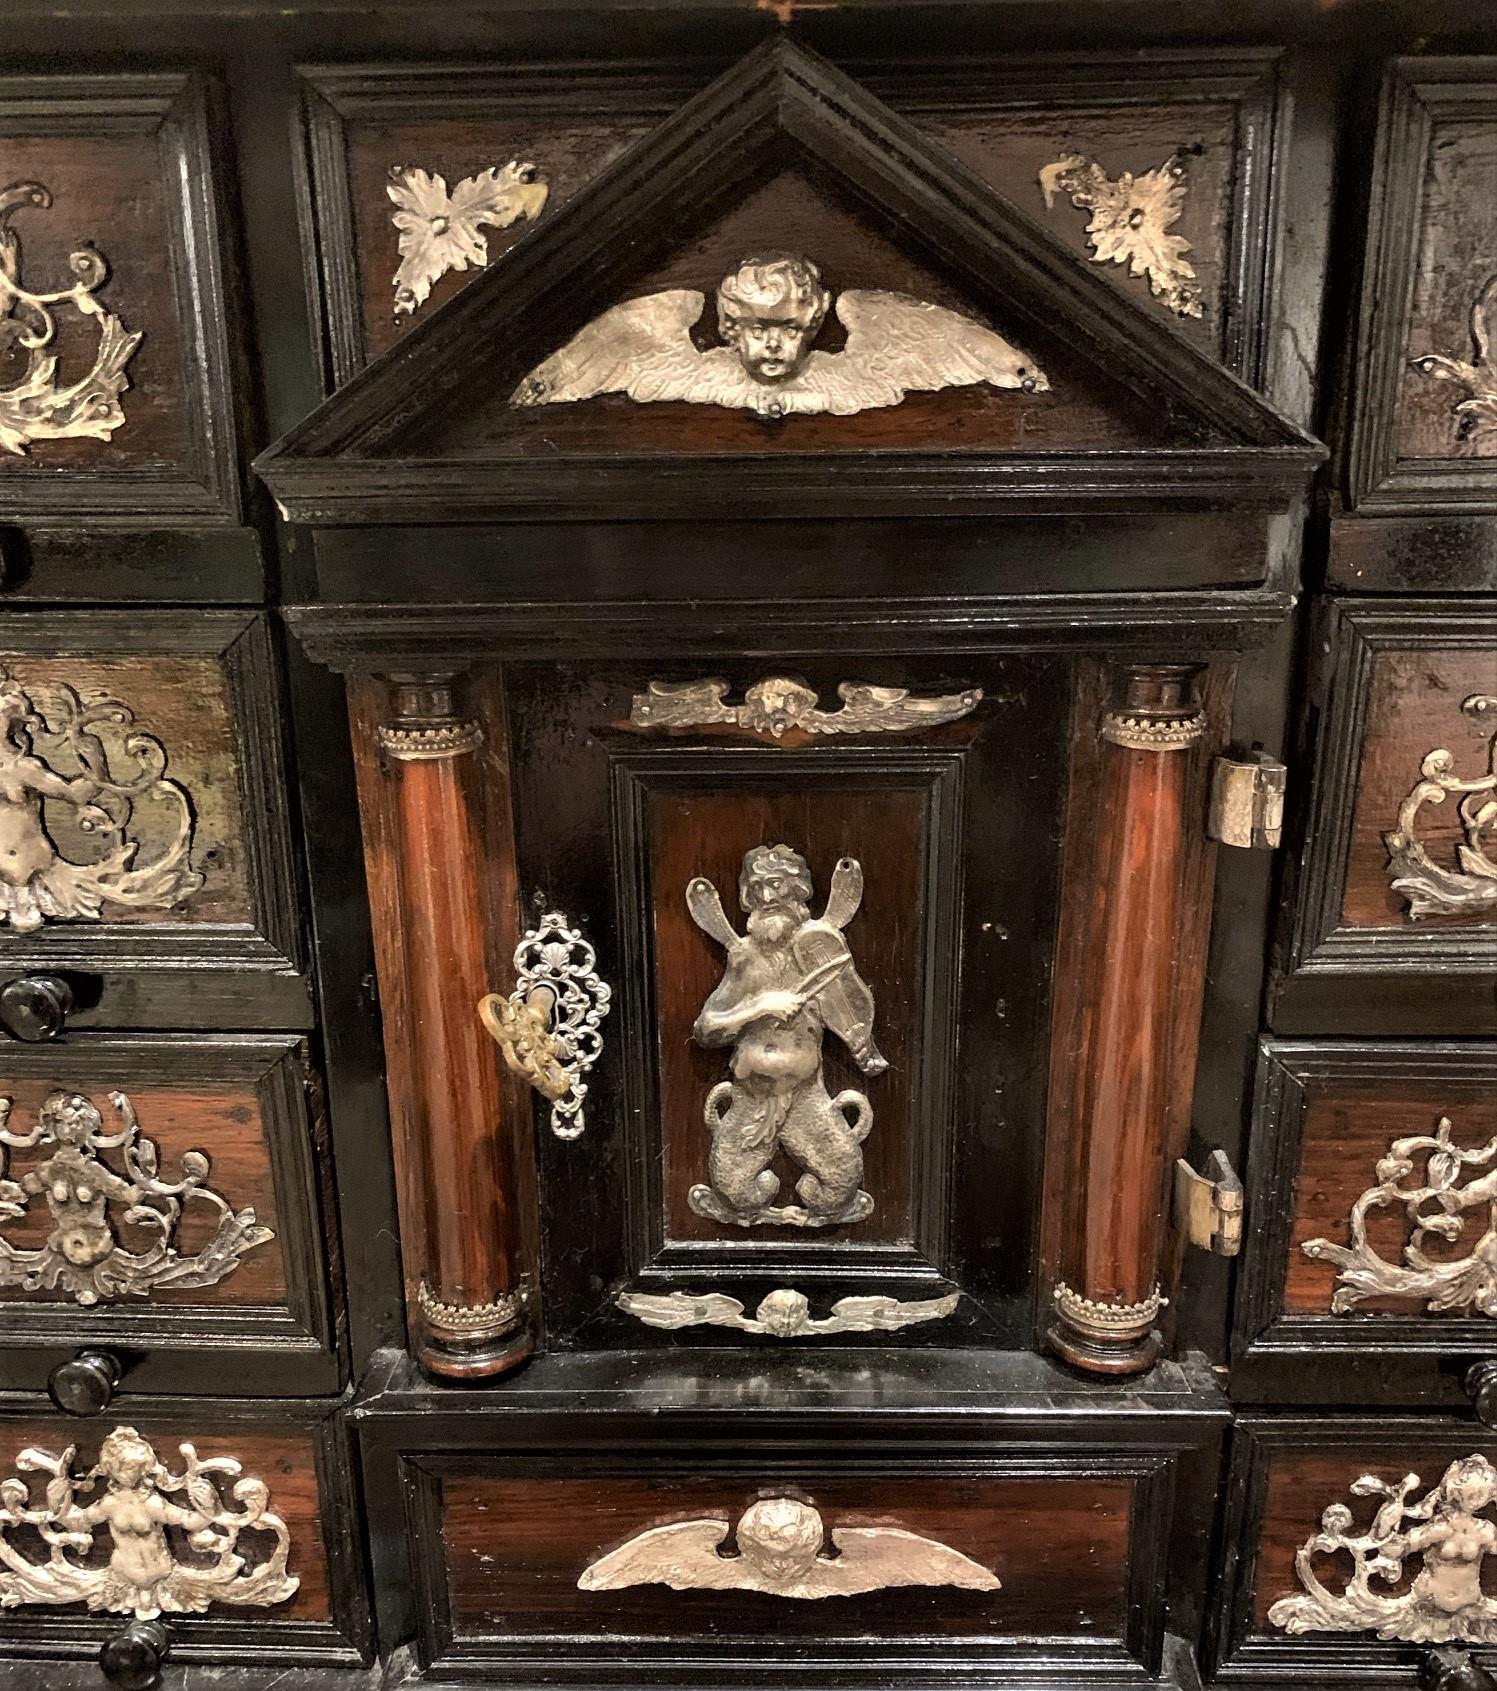 Important 18th century Continental ebonized trinket cabinet with a lift-top compartment having rosewood inlays. The doors open to reveal painted inset panels and multiple fitted drawers adorned with silver filigree mounts. The paneled sides